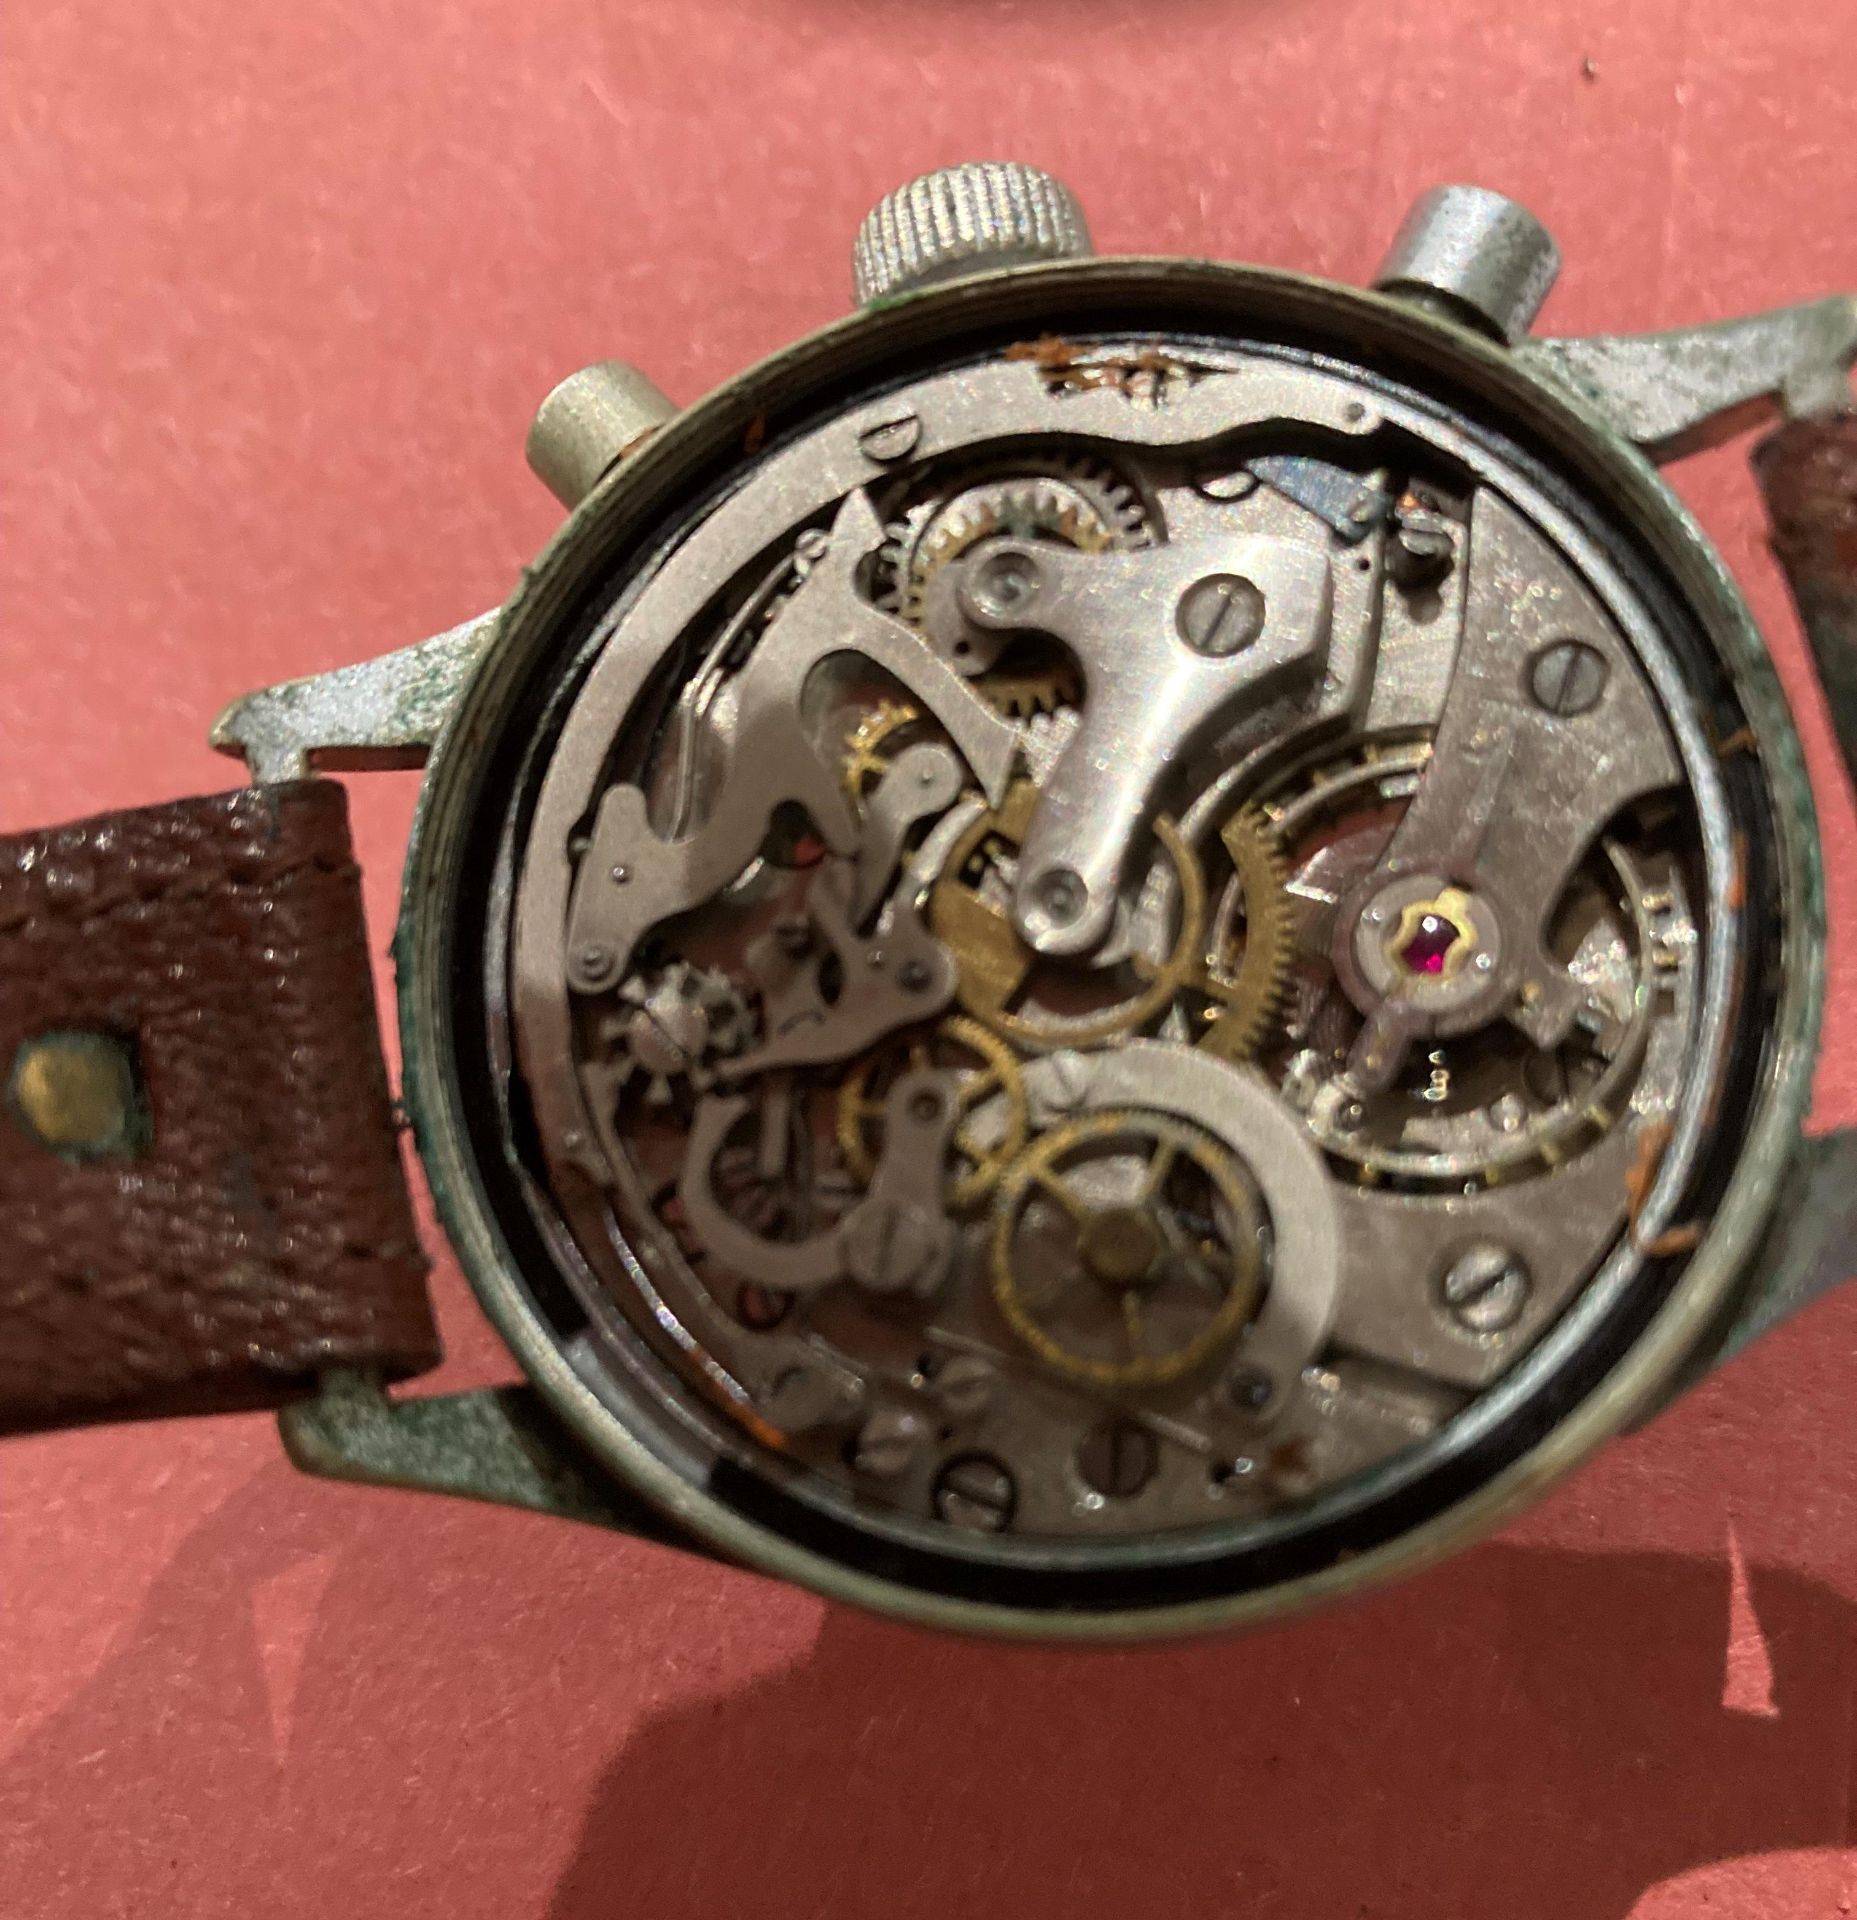 A Hanharts World War II Luftwaffe pilots chronograph with black face and brown leather strap - Image 7 of 10